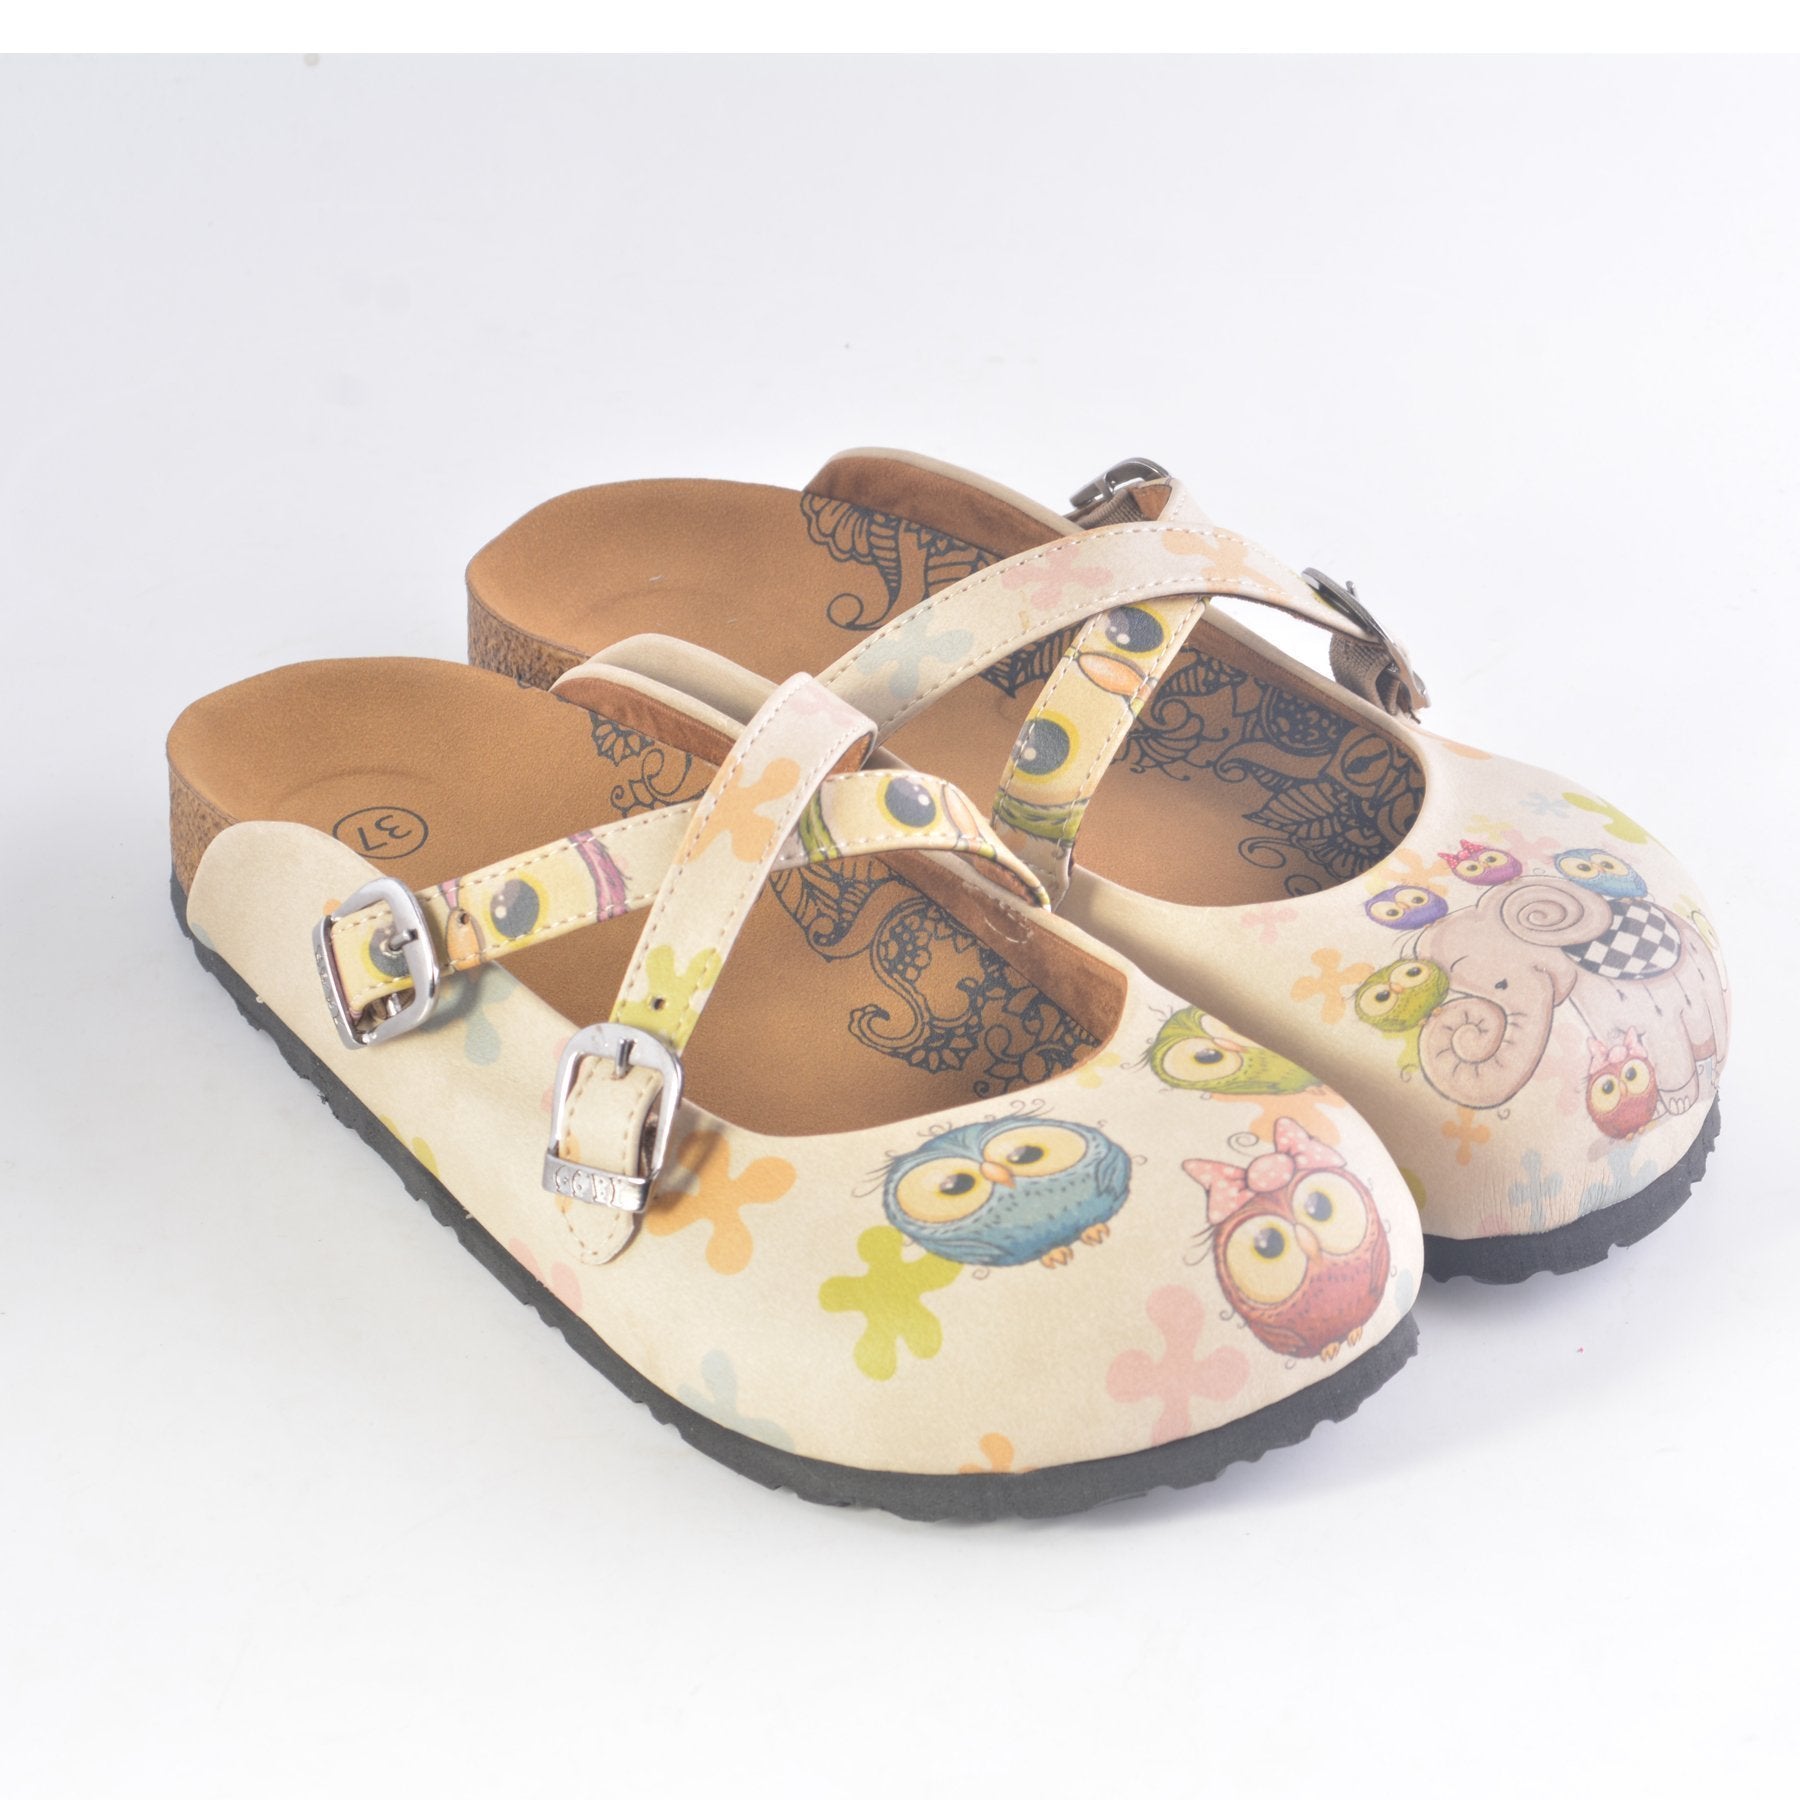 Elephant and Owl Clogs CAL164 - Goby CALCEO Clogs 